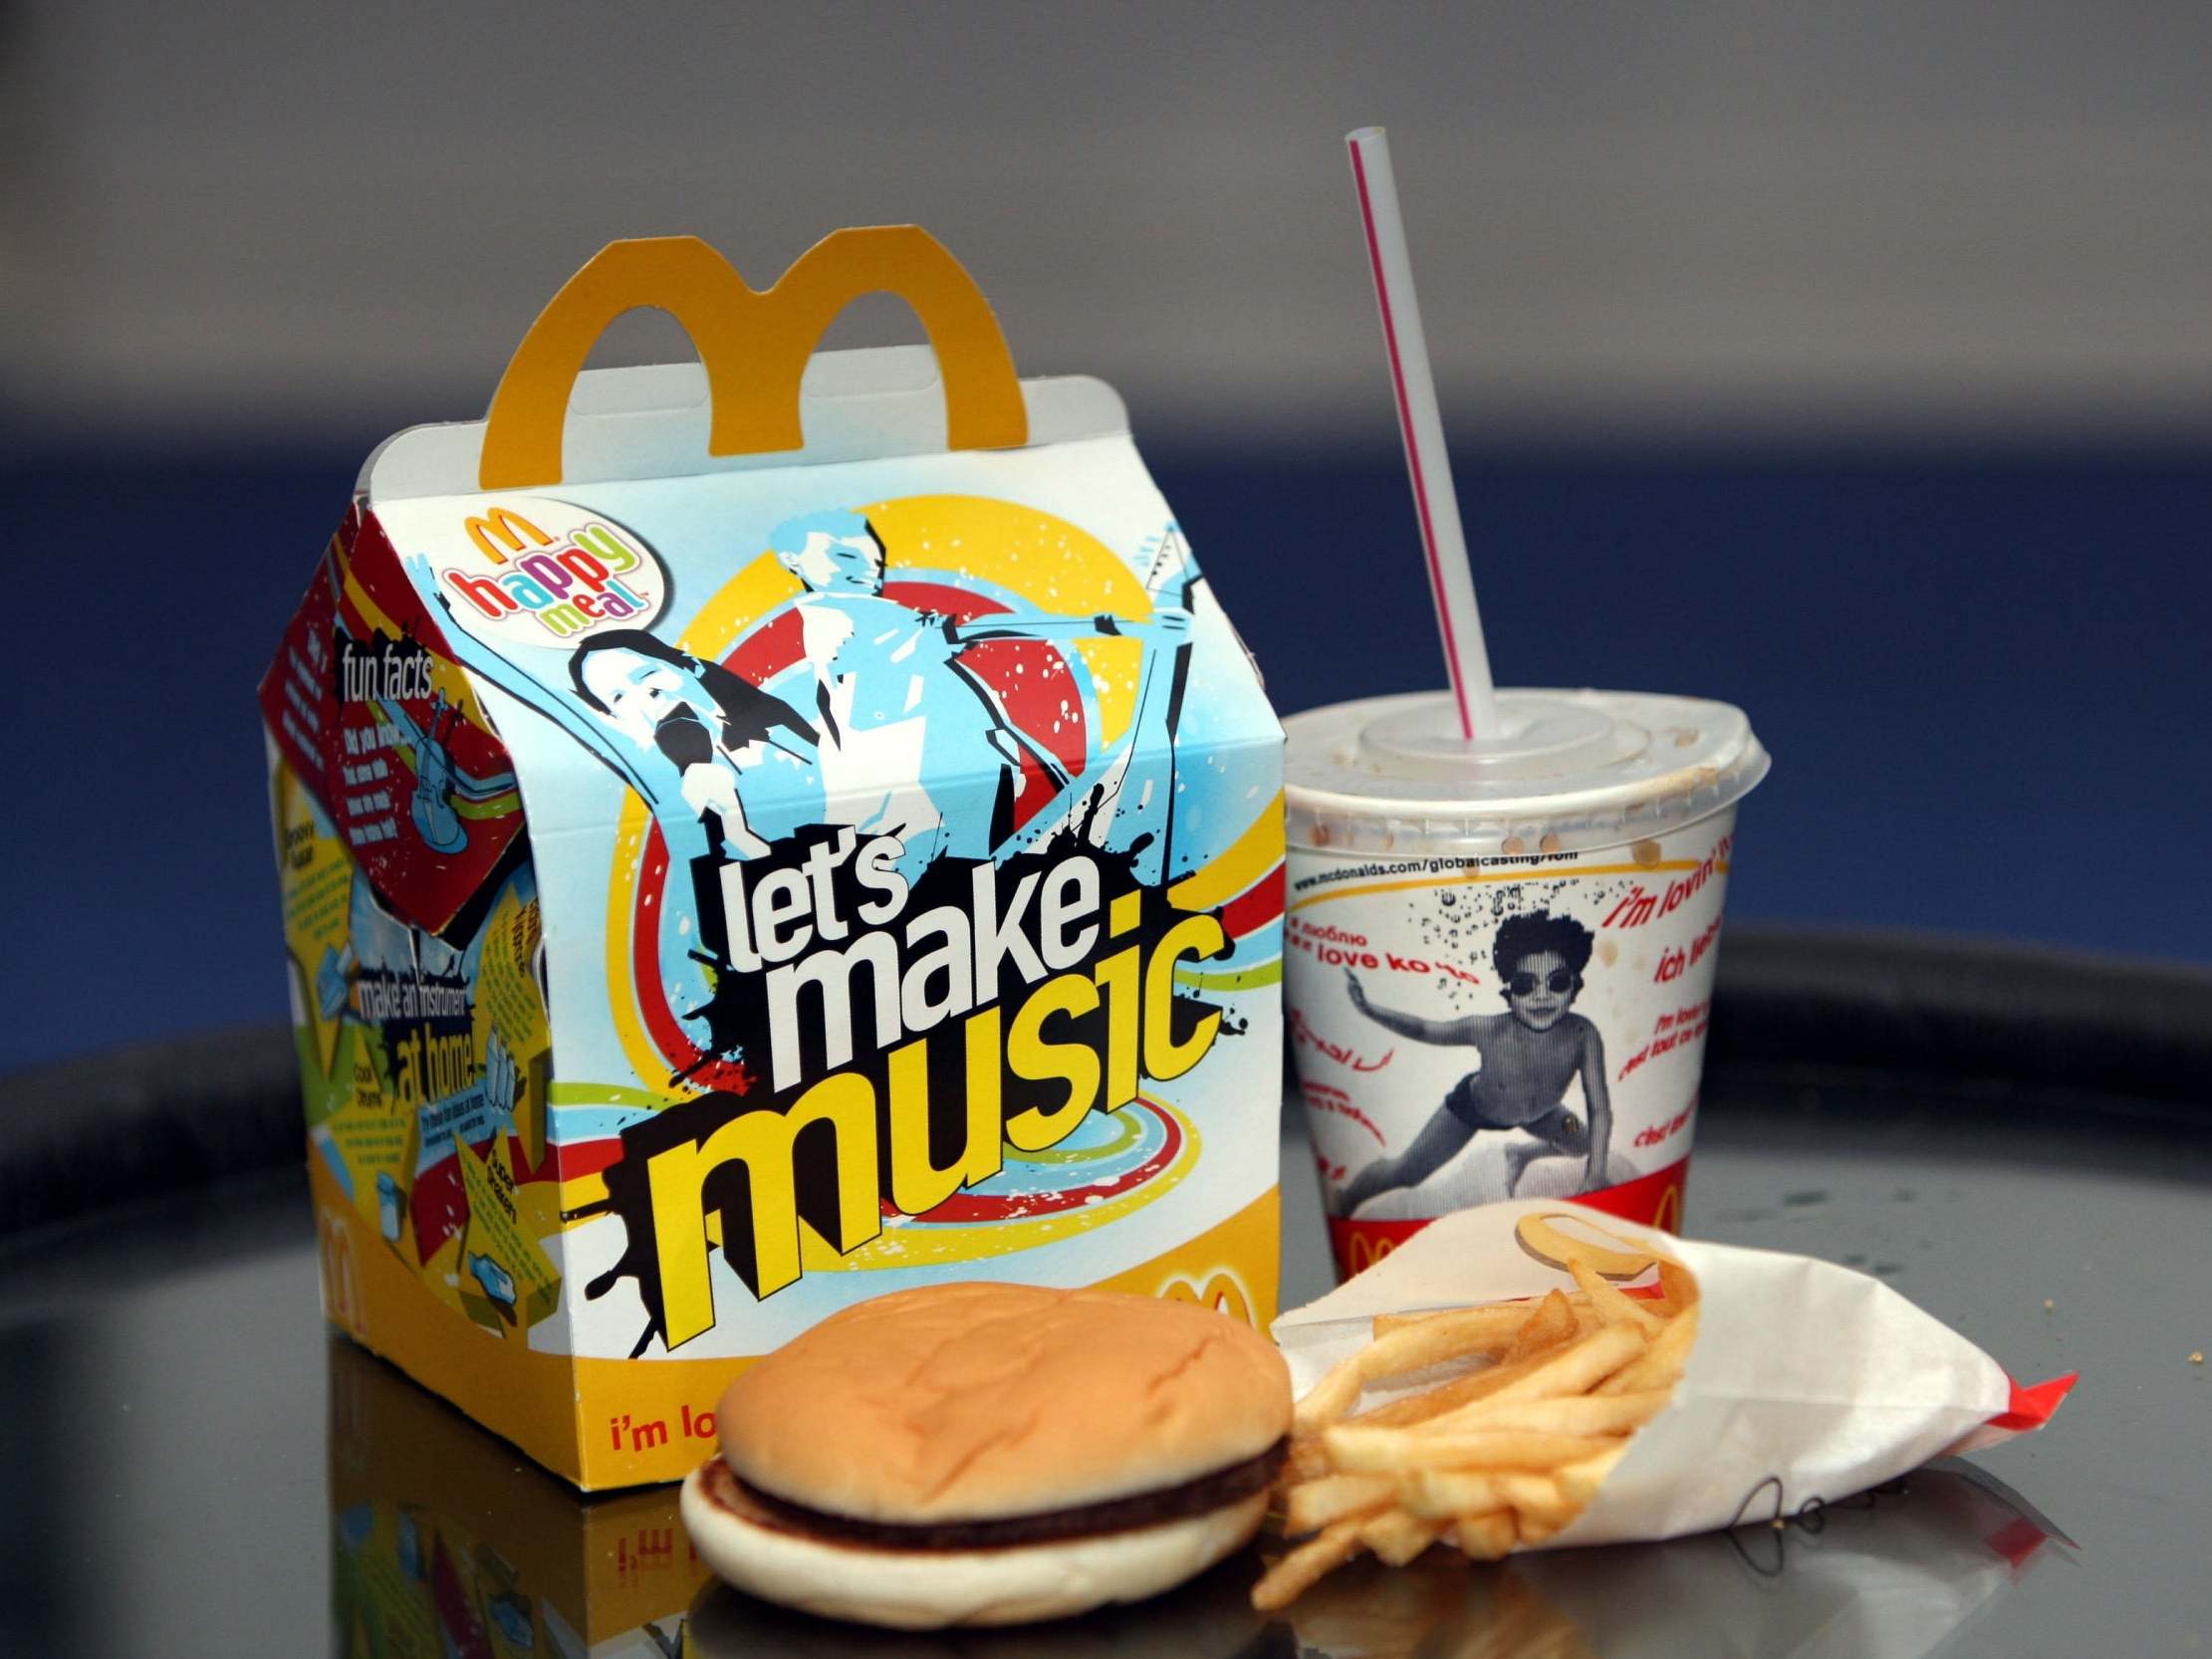 Happy Meal from a McDonald's restaurant